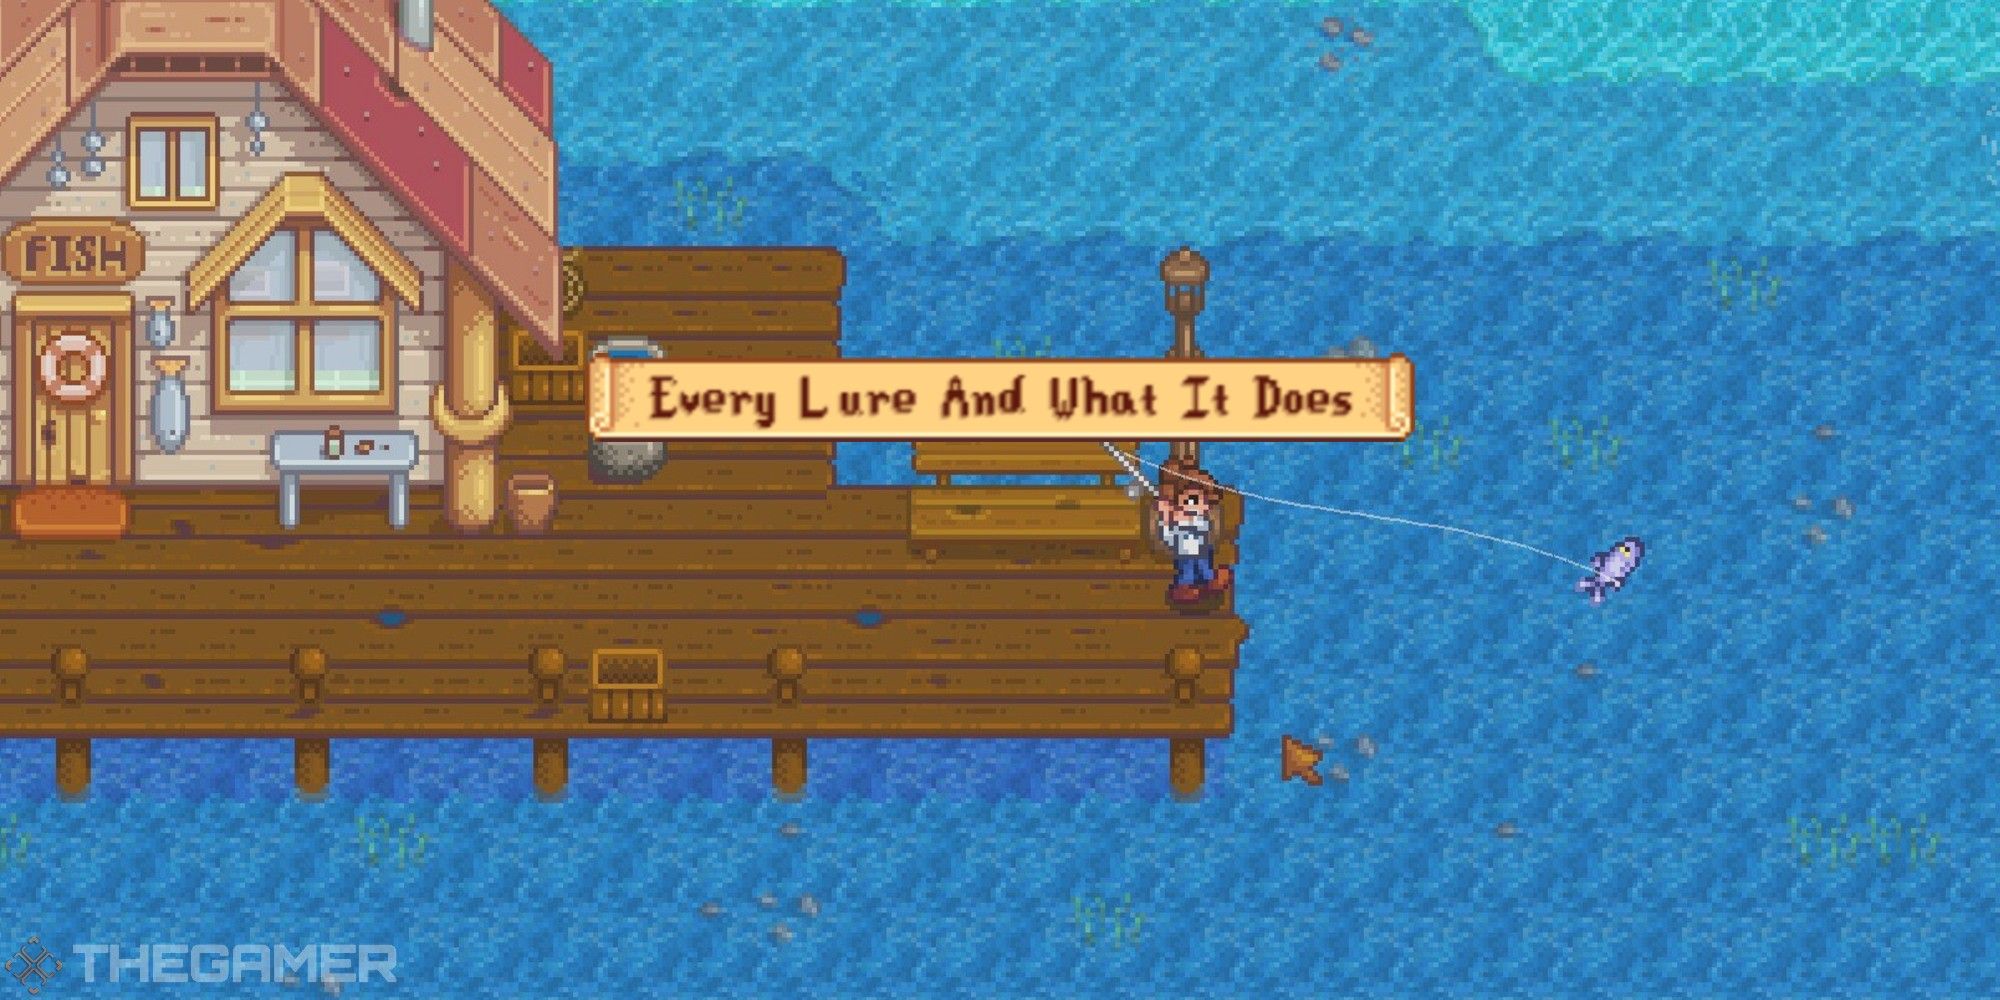 stardew valley player fishing with text 'every lure and what it does'